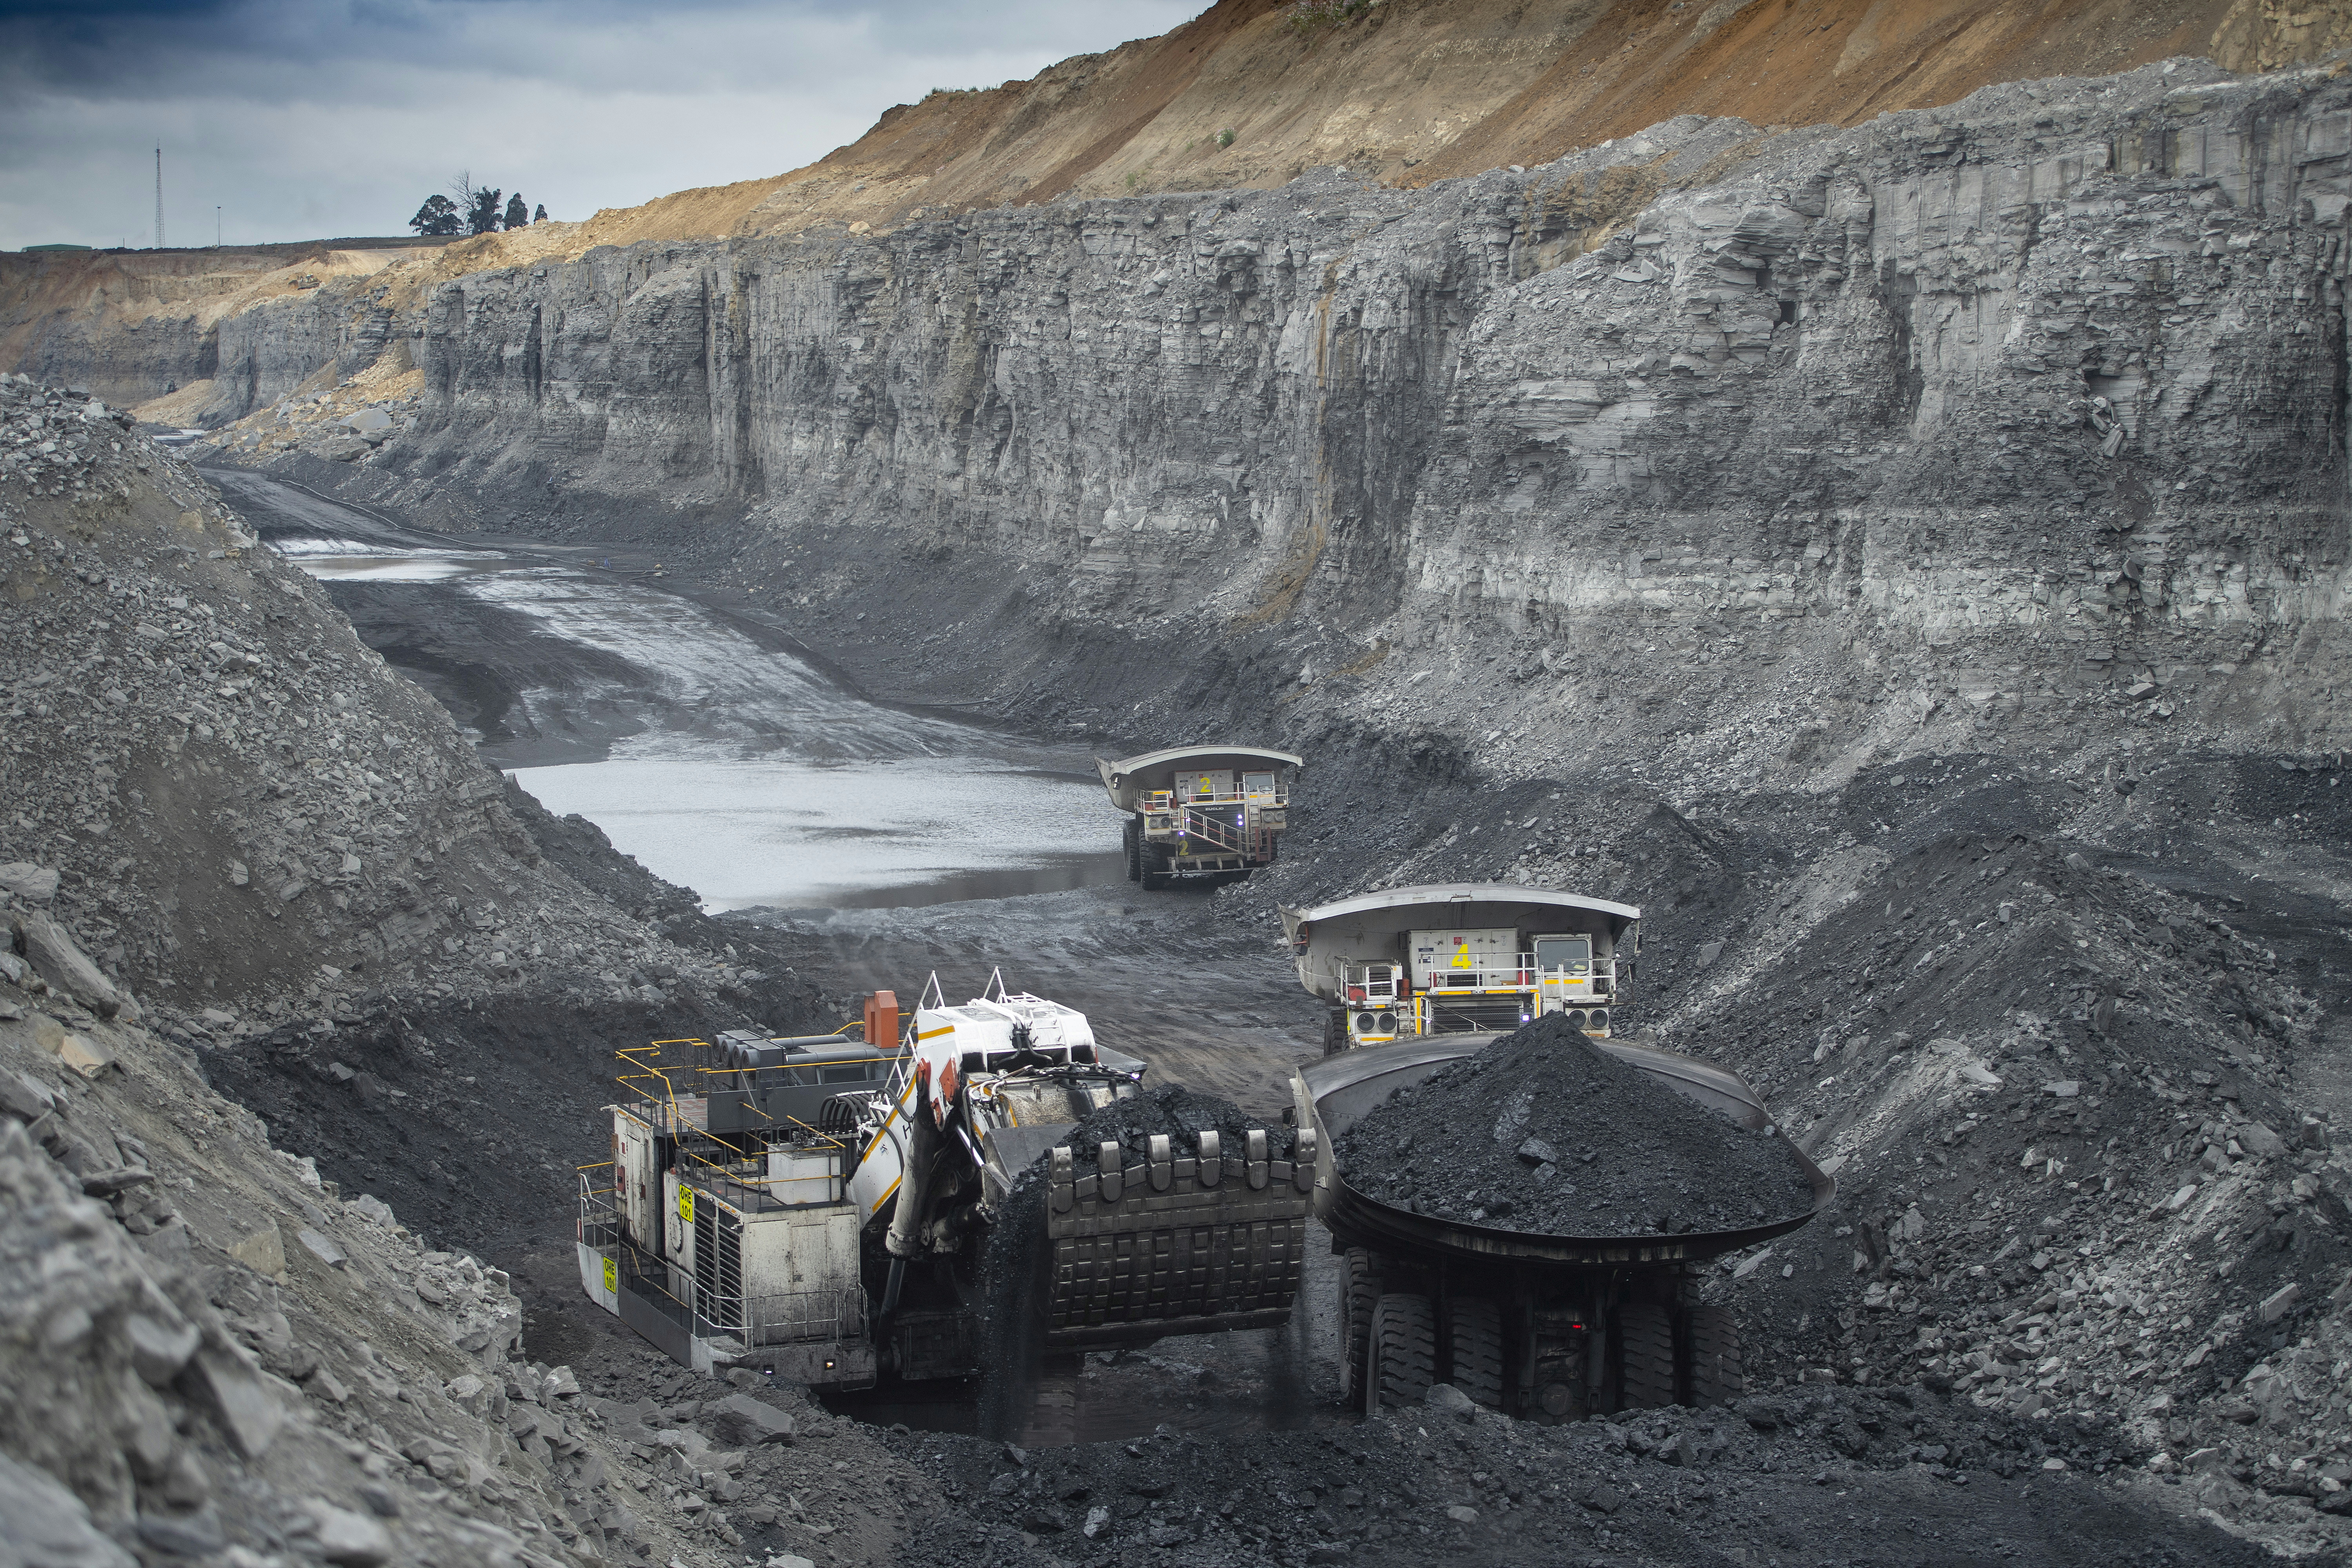 Thungela's thermal coal operations at Isibonelo Colliery, South Africa.